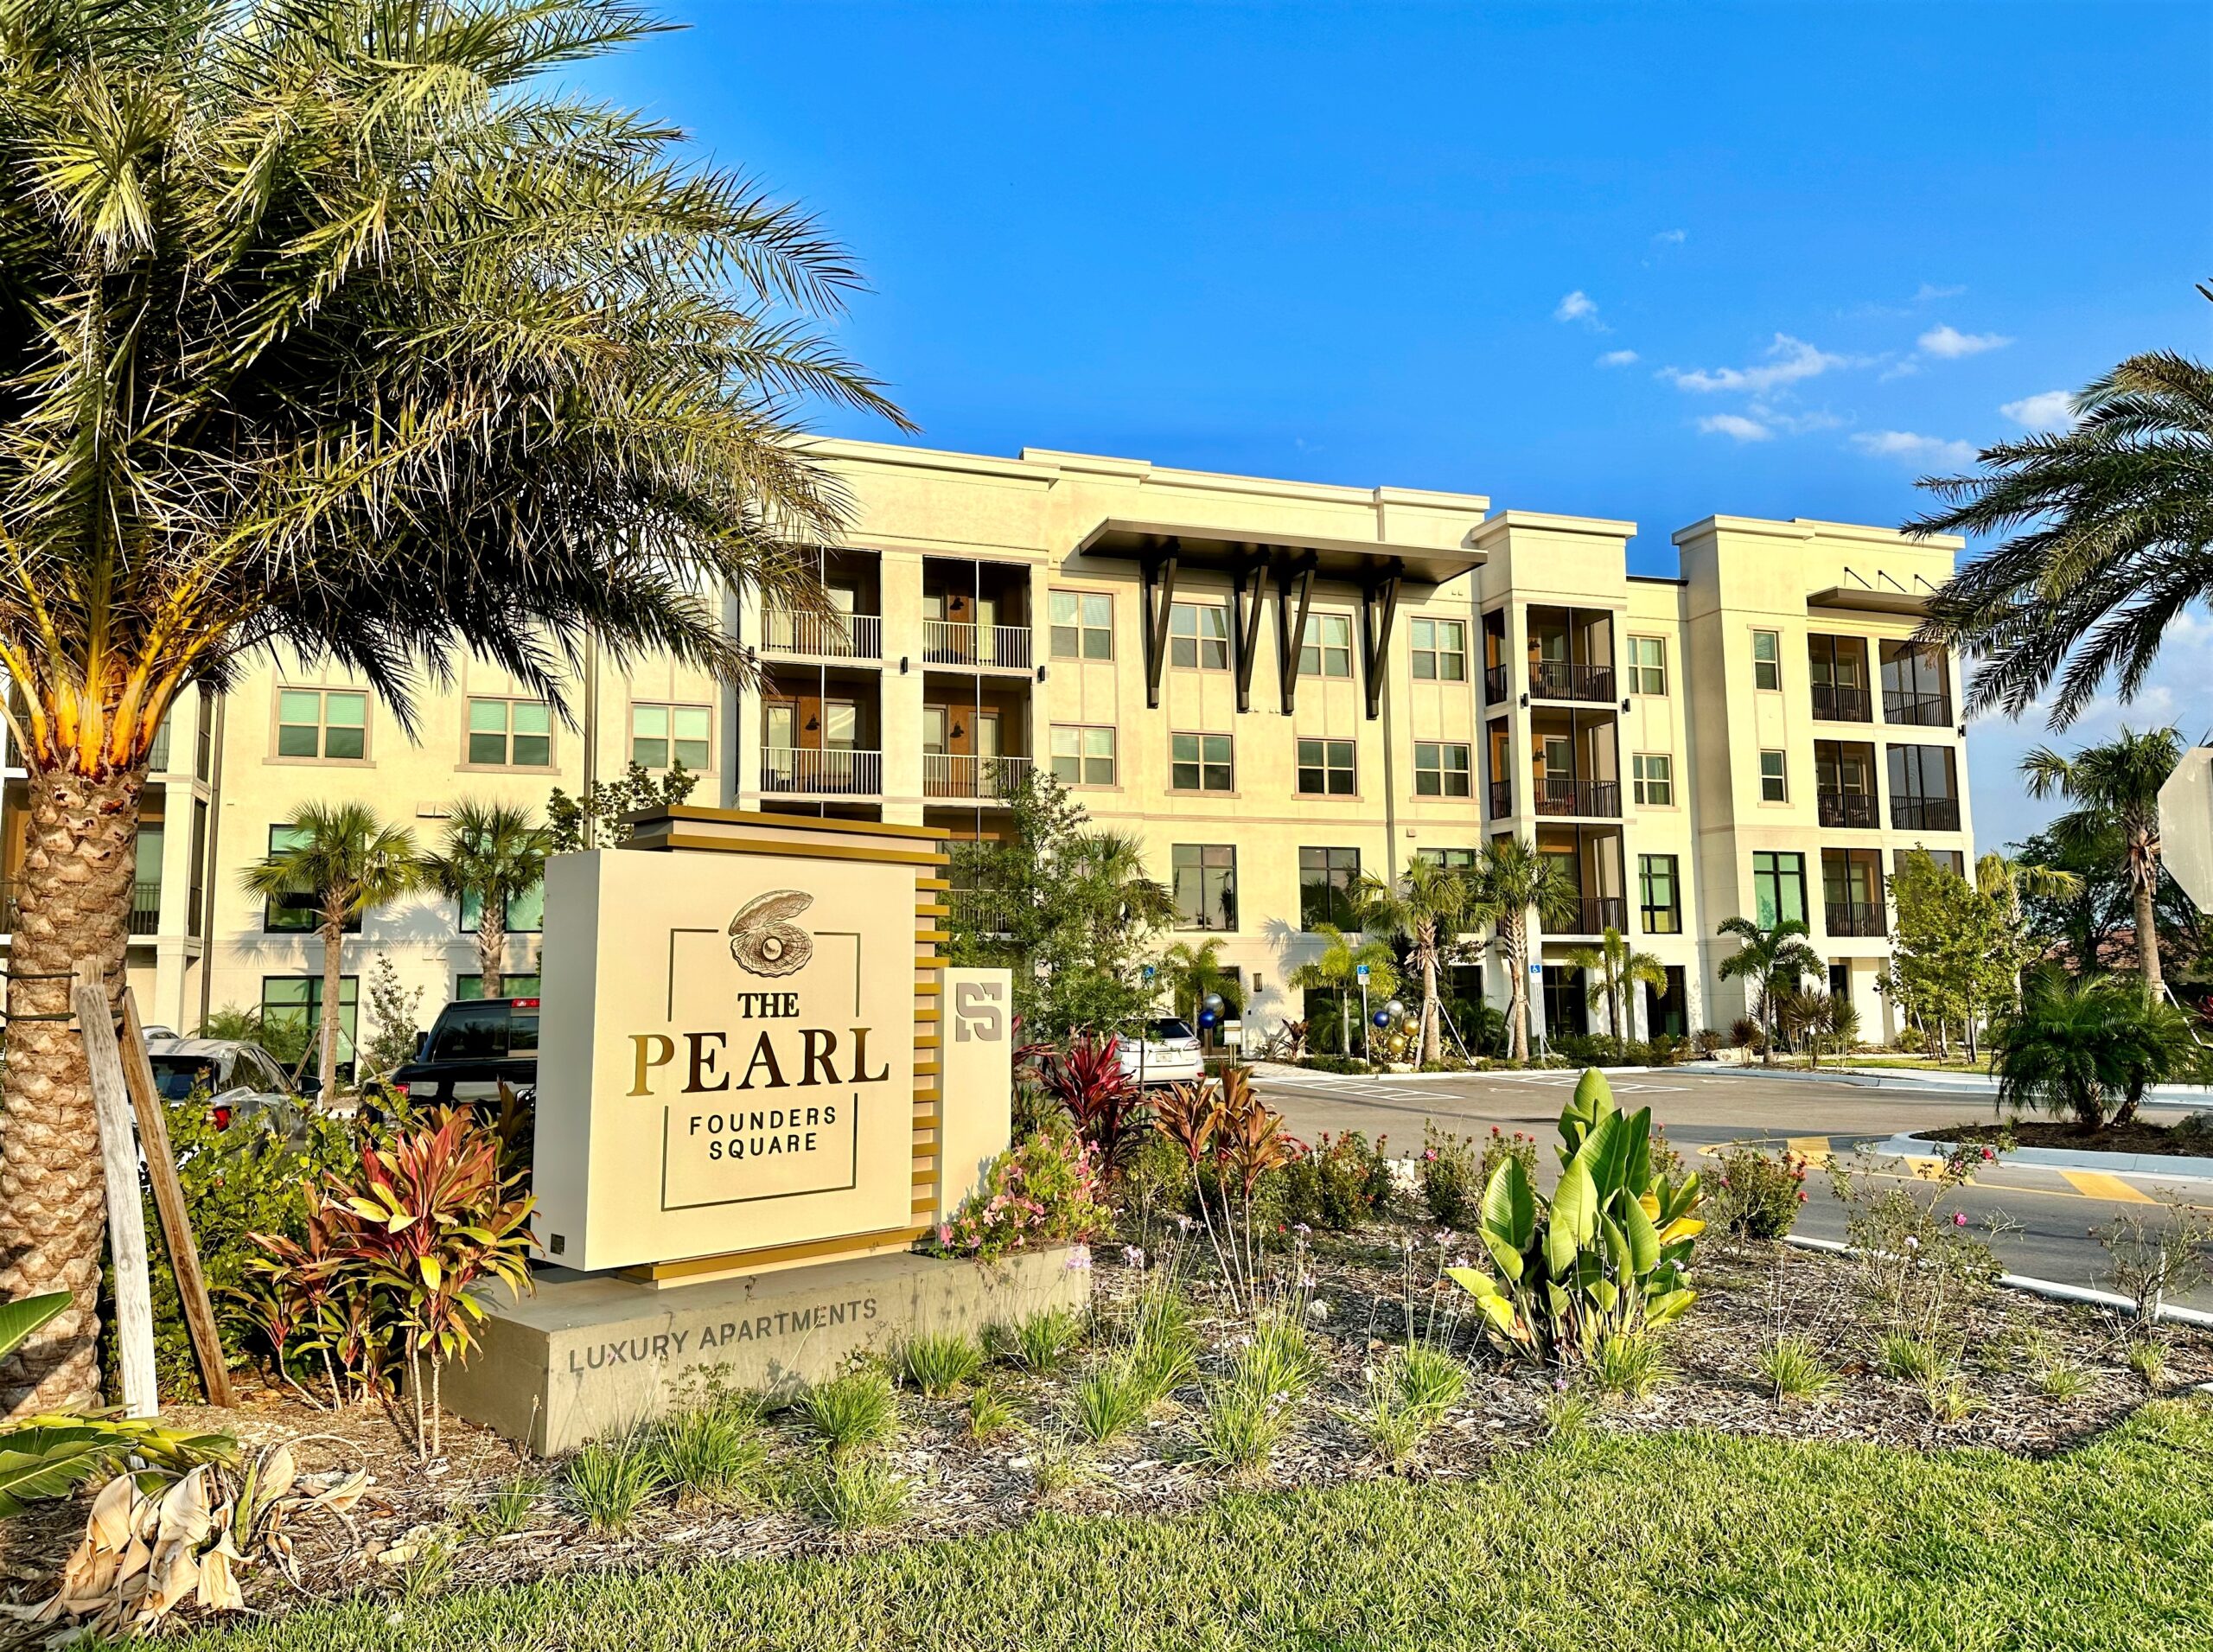 The Pearl Founders Square apartments sell for $125 million -